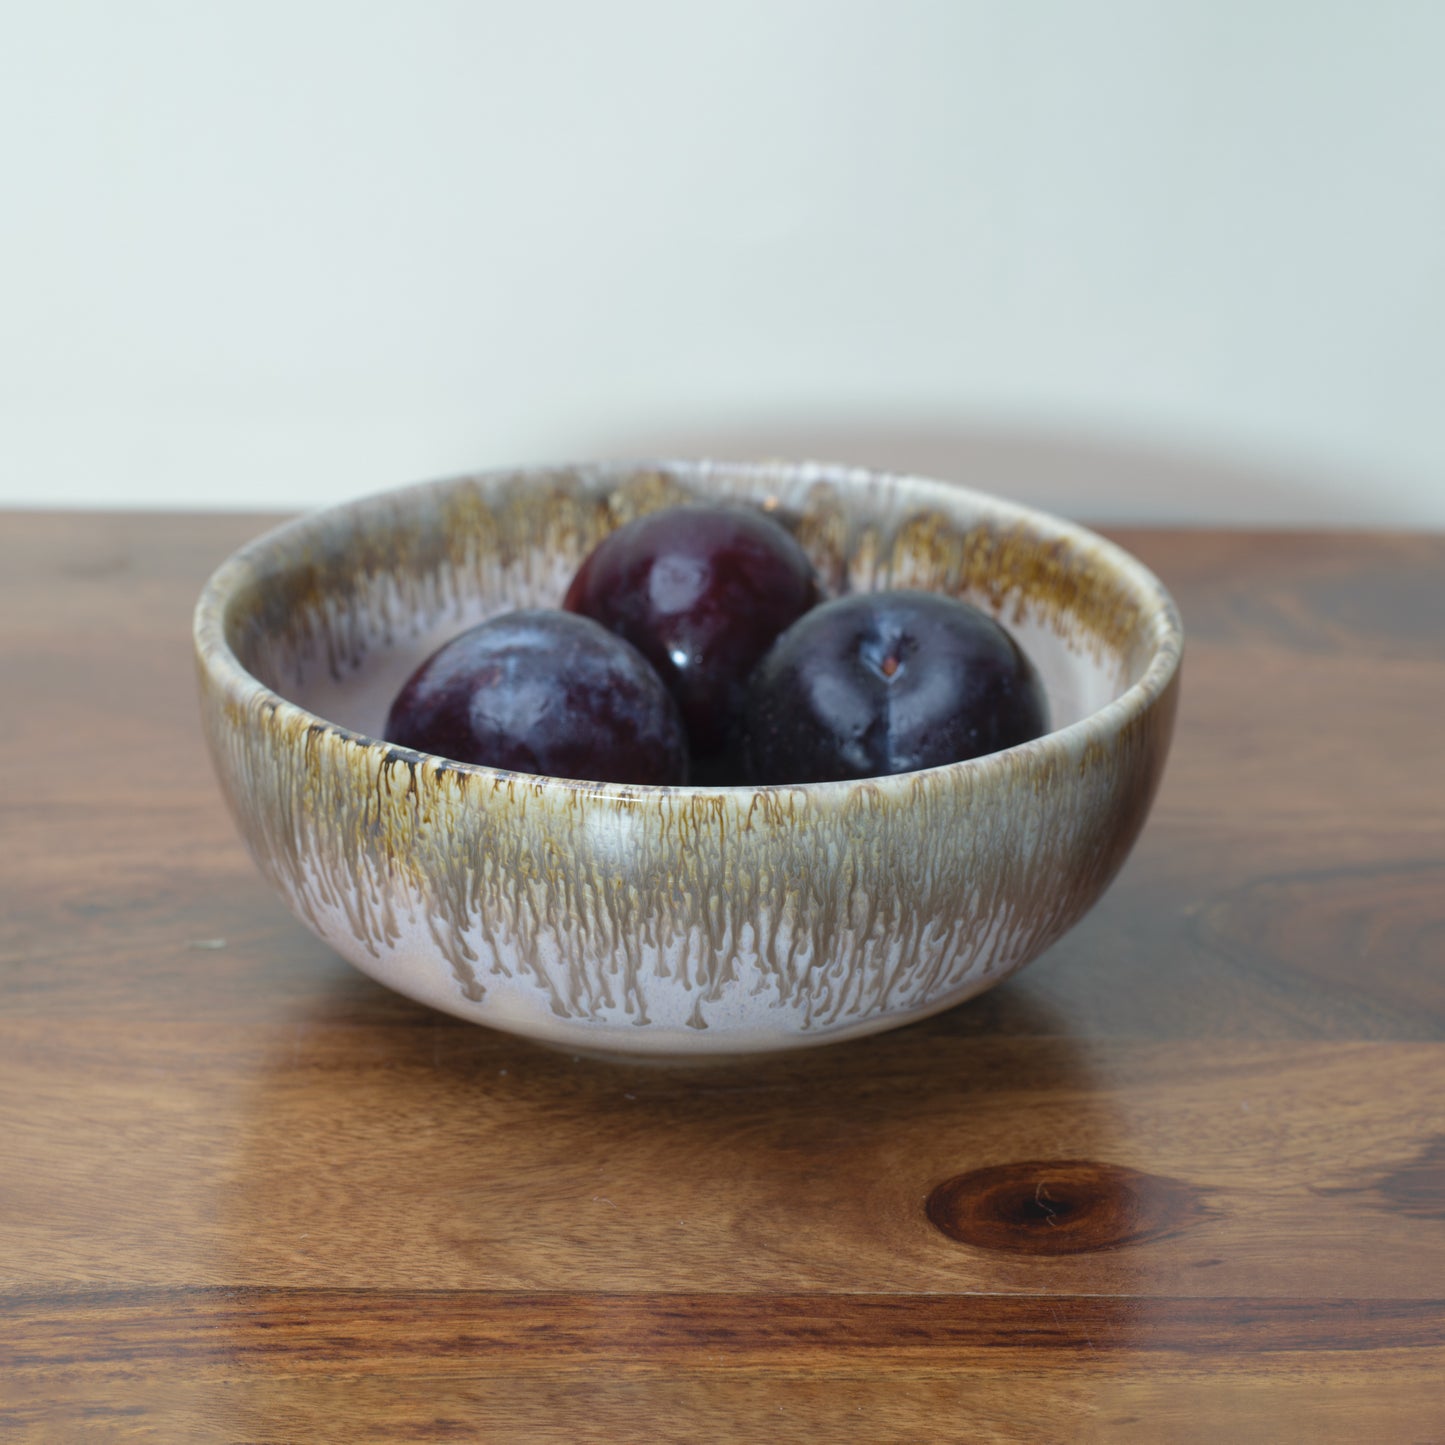 Small ceramic bowl, light pink glaze with brown drip from rim, plums inside. Discover home decor gifts in India.